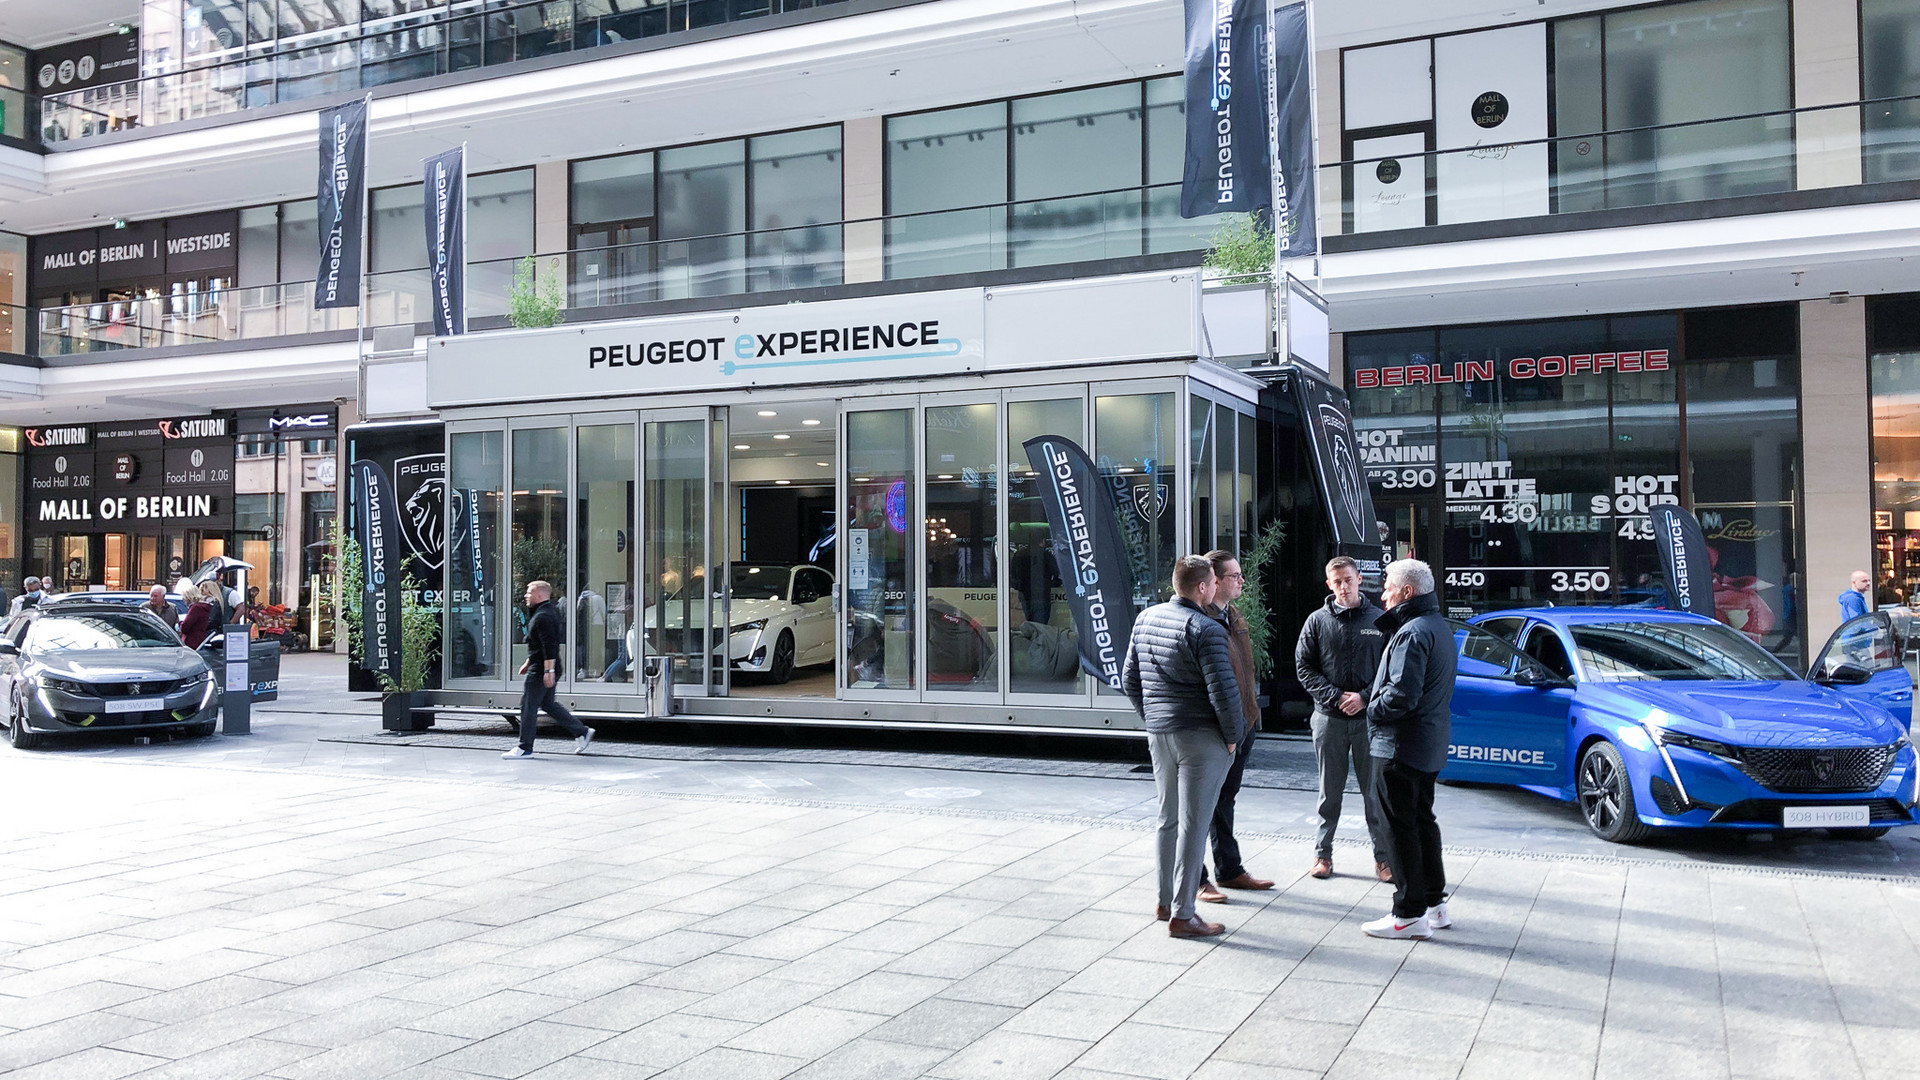 Live brand experience Peugeot 